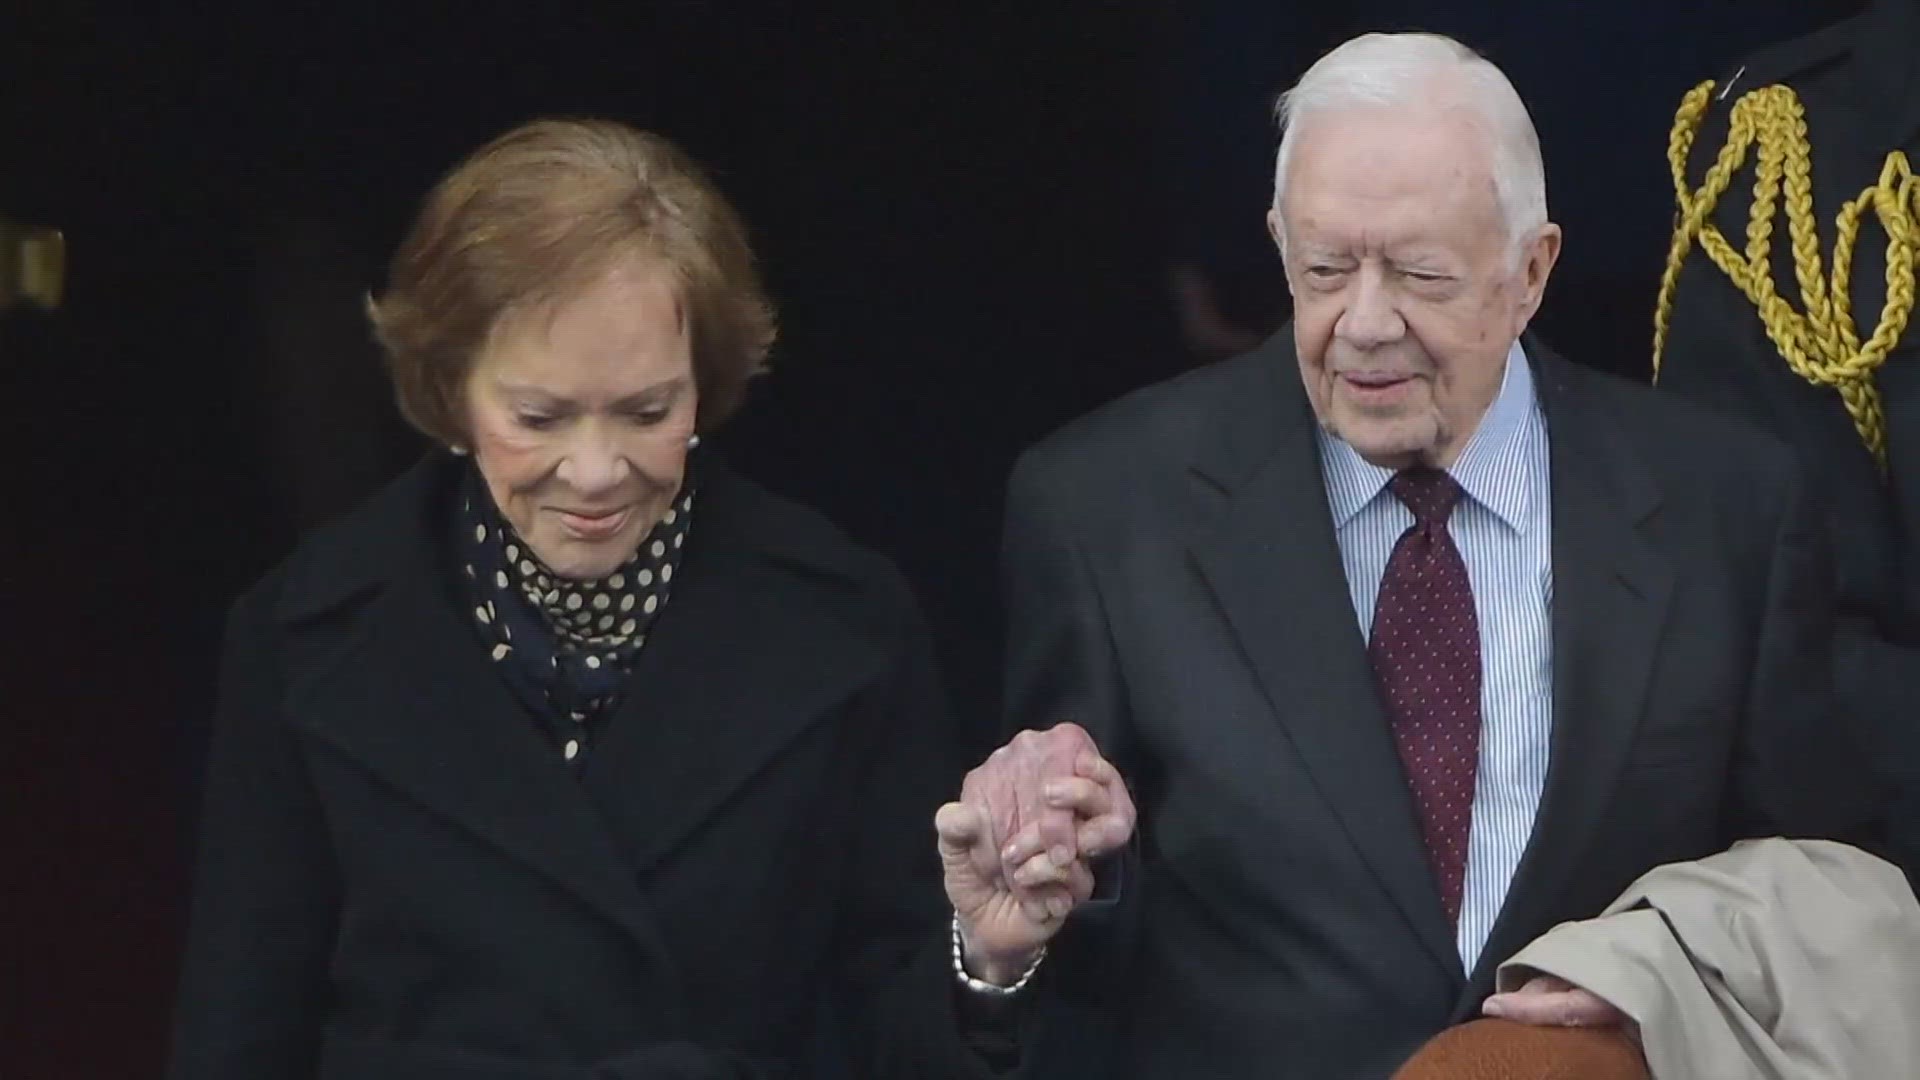 NBC's Lester Holt takes a look back on Rosalynn Carter's life and legacy.